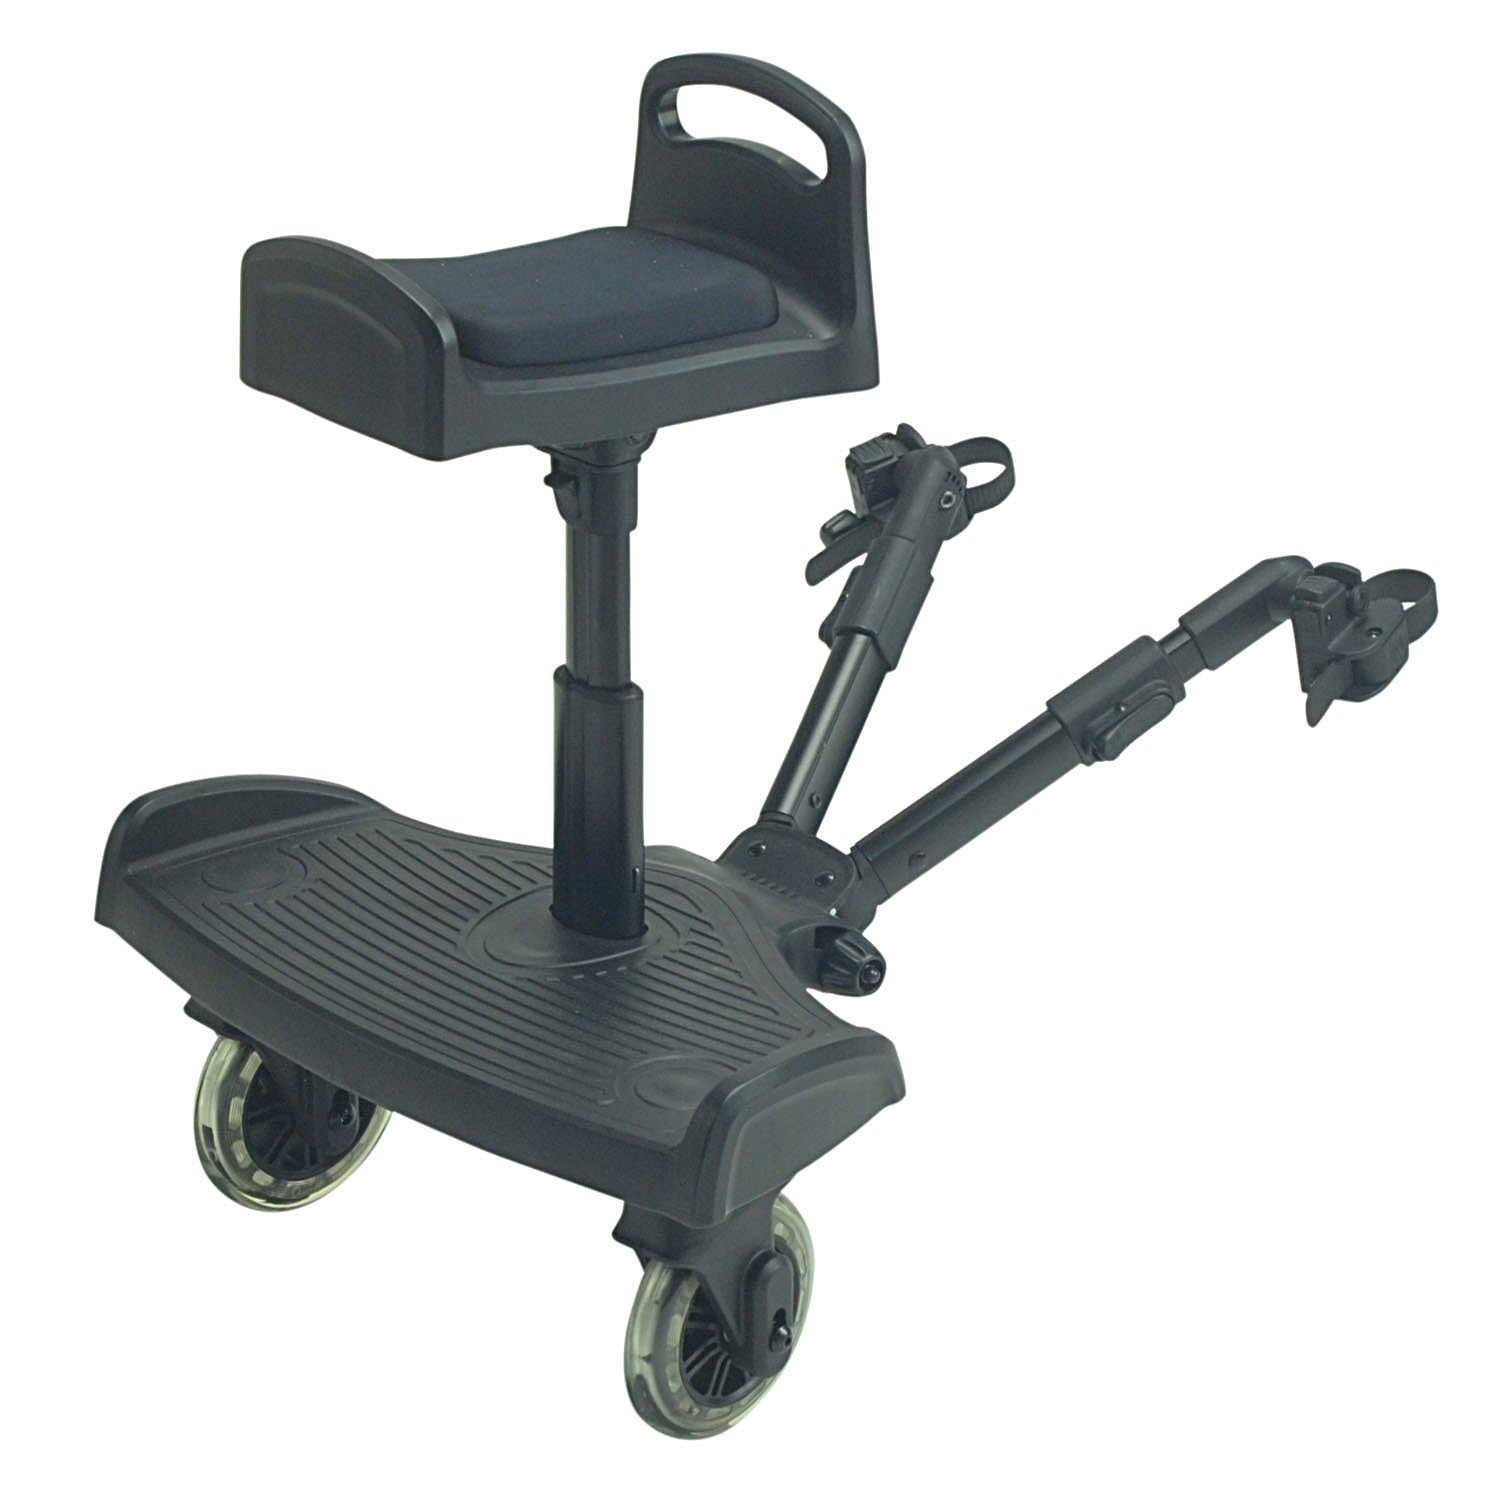 For-Your-Little-Ride On Board Compatible Travel Systems, First Wheels Single